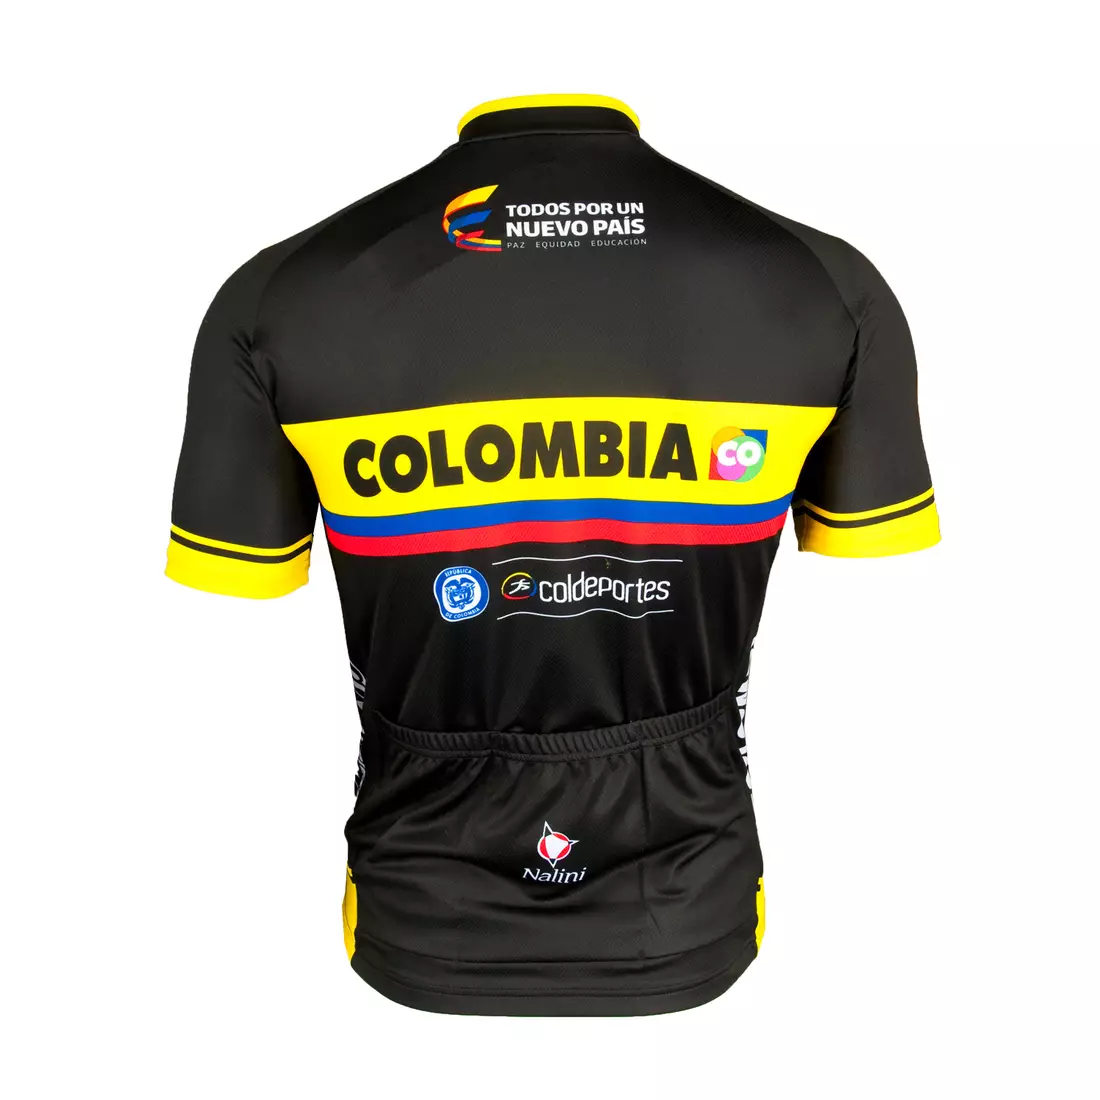 COLOMBIA 2015 cycling jersey